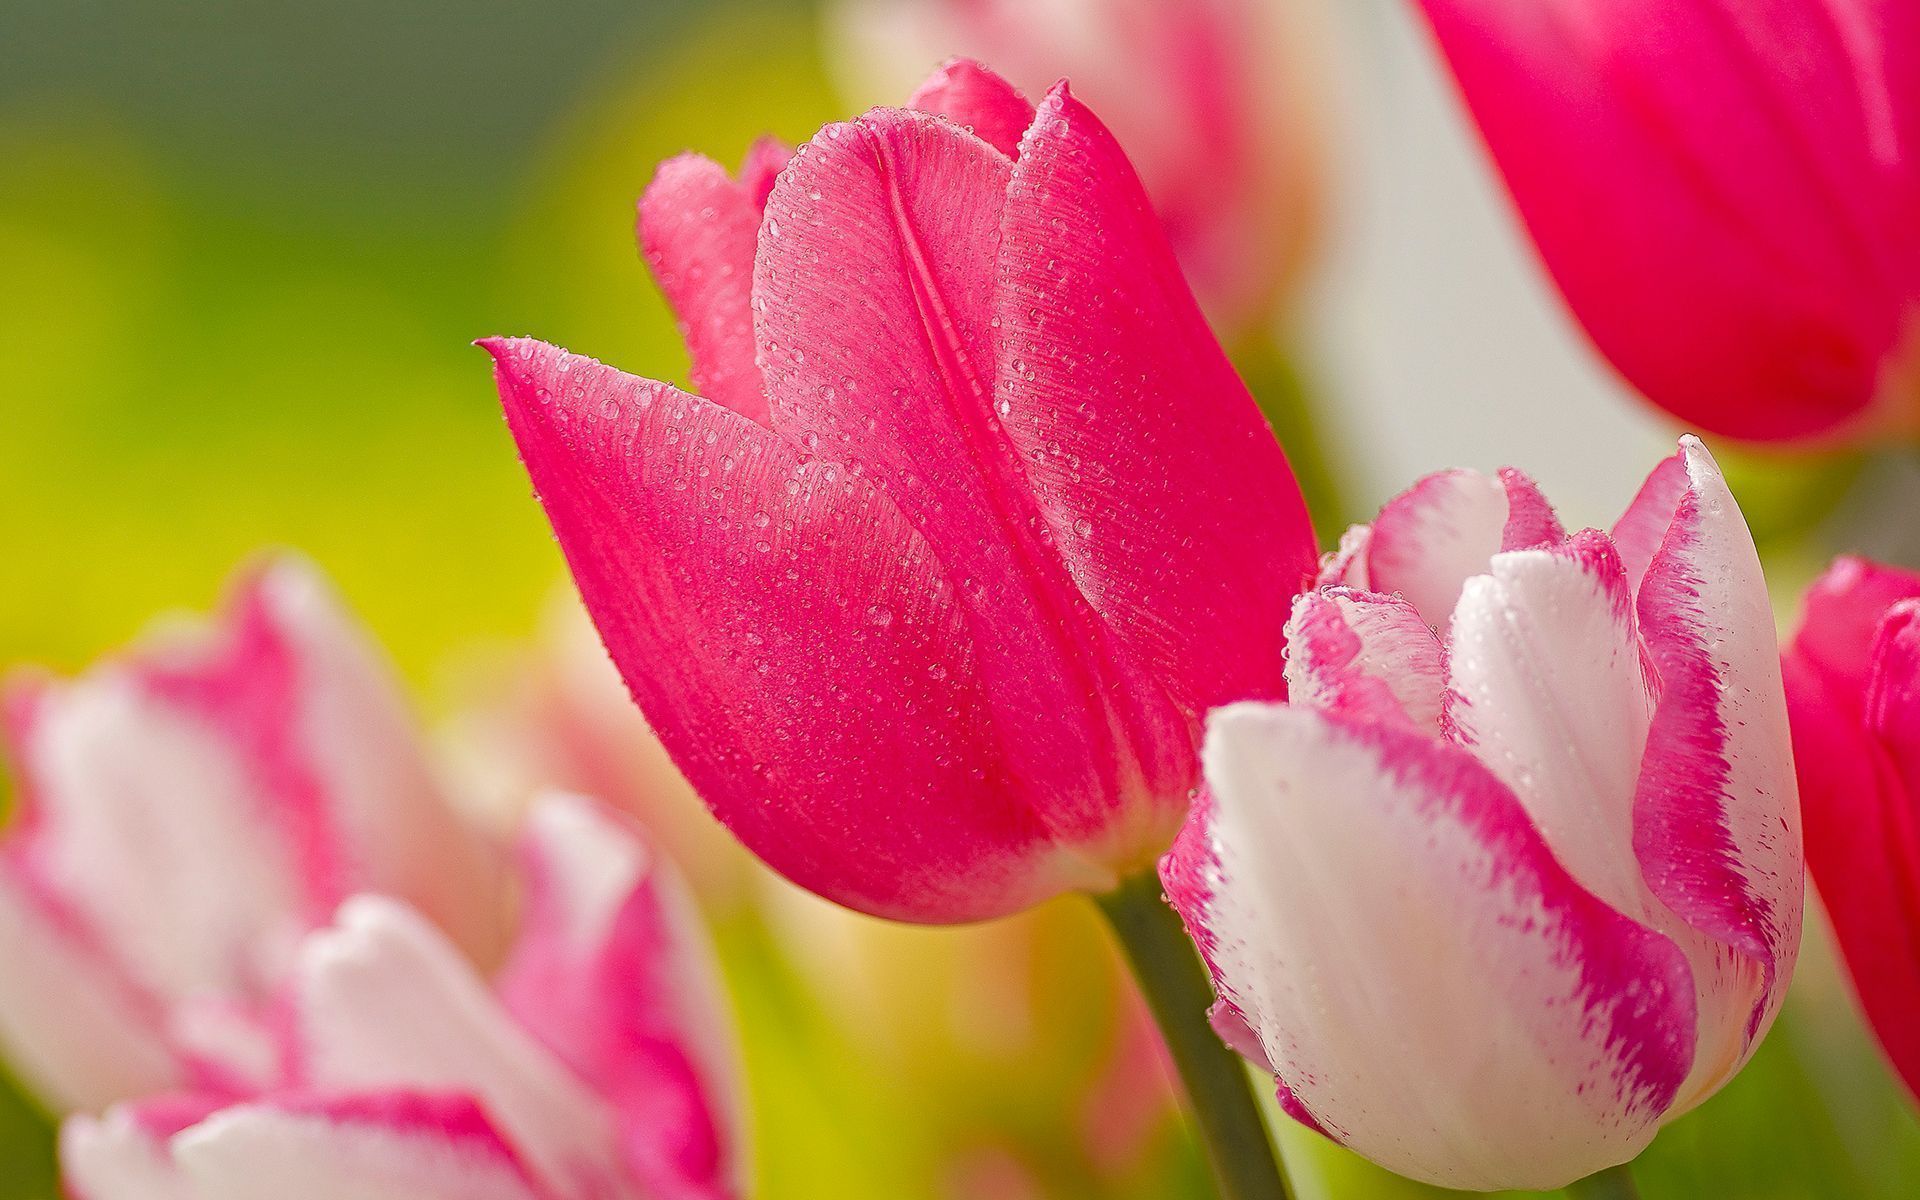 Tulip Flowers Wallpaper | Wallpapers, Backgrounds, Images, Art Photos.